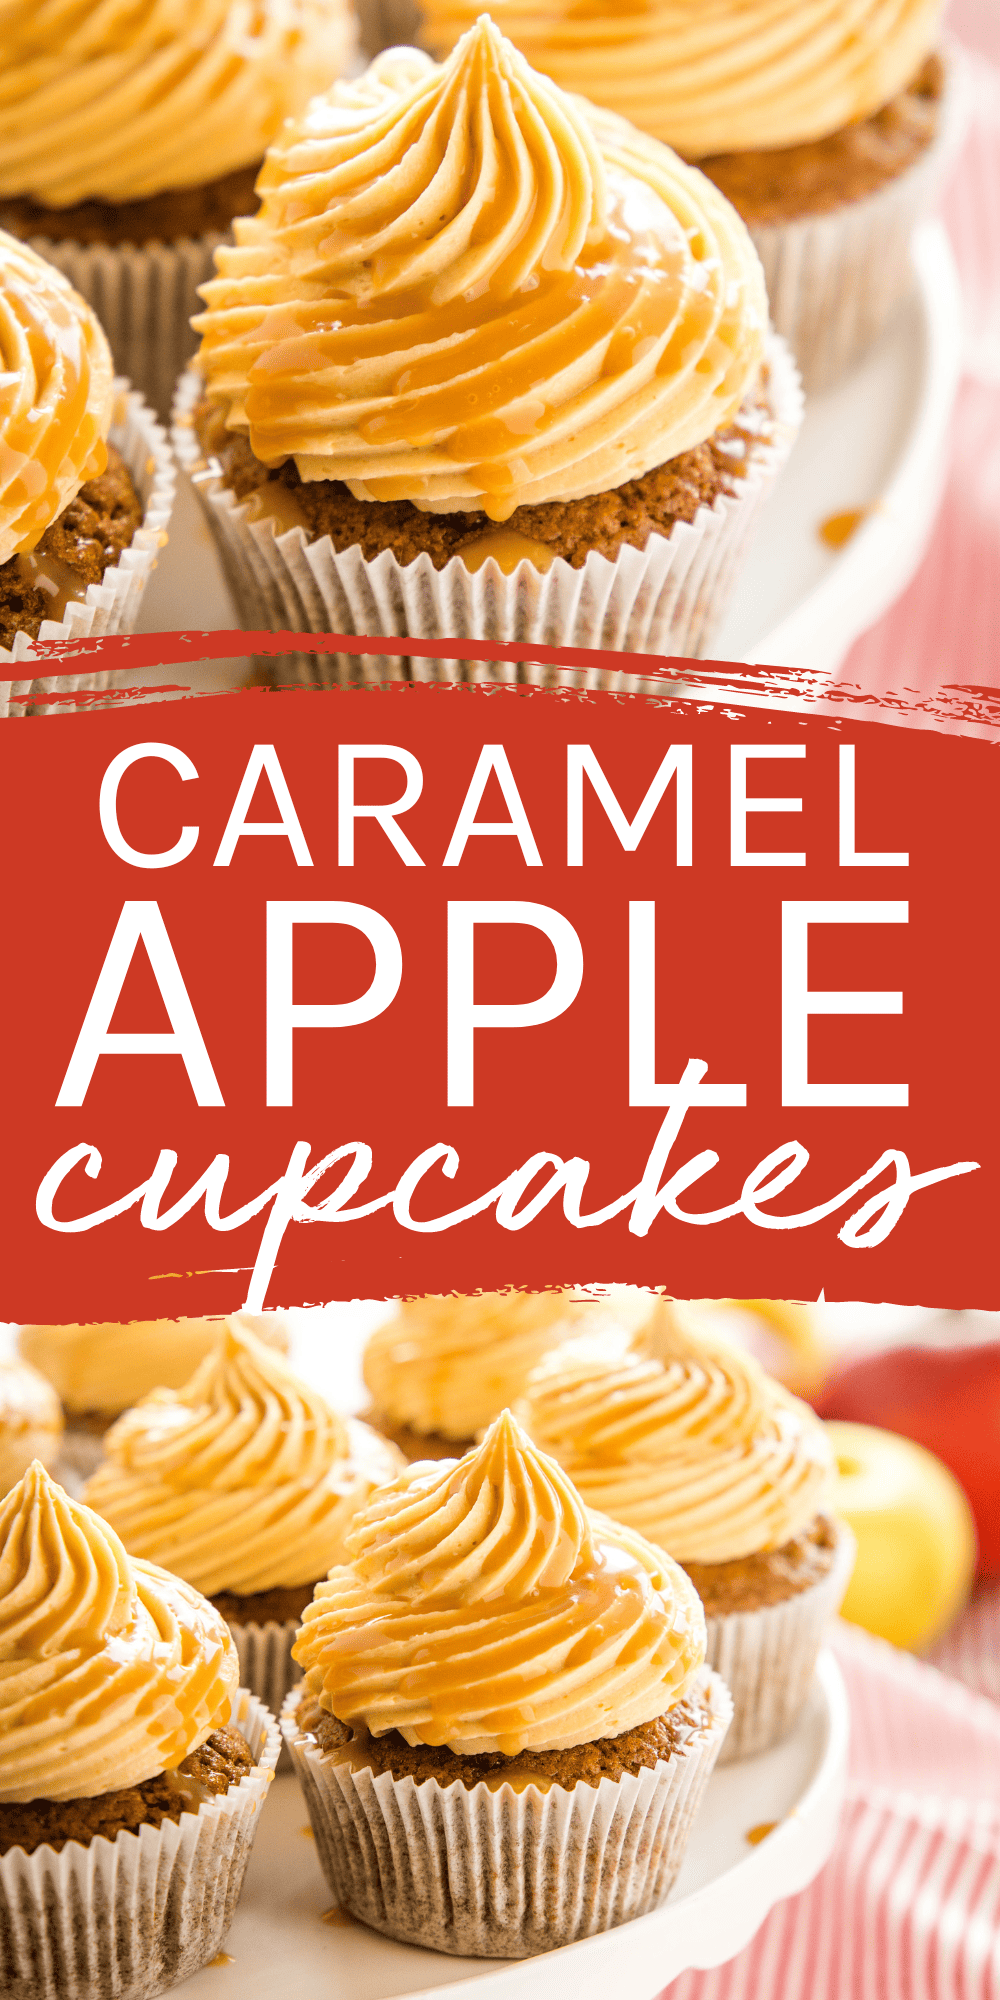 This Caramel Apple Cupcakes recipe is the perfect treat for fall! An apple and spice infused cupcake base with fluffy homemade caramel buttercream frosting! Recipe from thebusybaker,ca! #caramelapplecupcakes #applecupcakes #caramelcupcakes #easycupcakes #fallcupcakes #harvestcupcakes #falldessert #fallbaking #appledessert via @busybakerblog